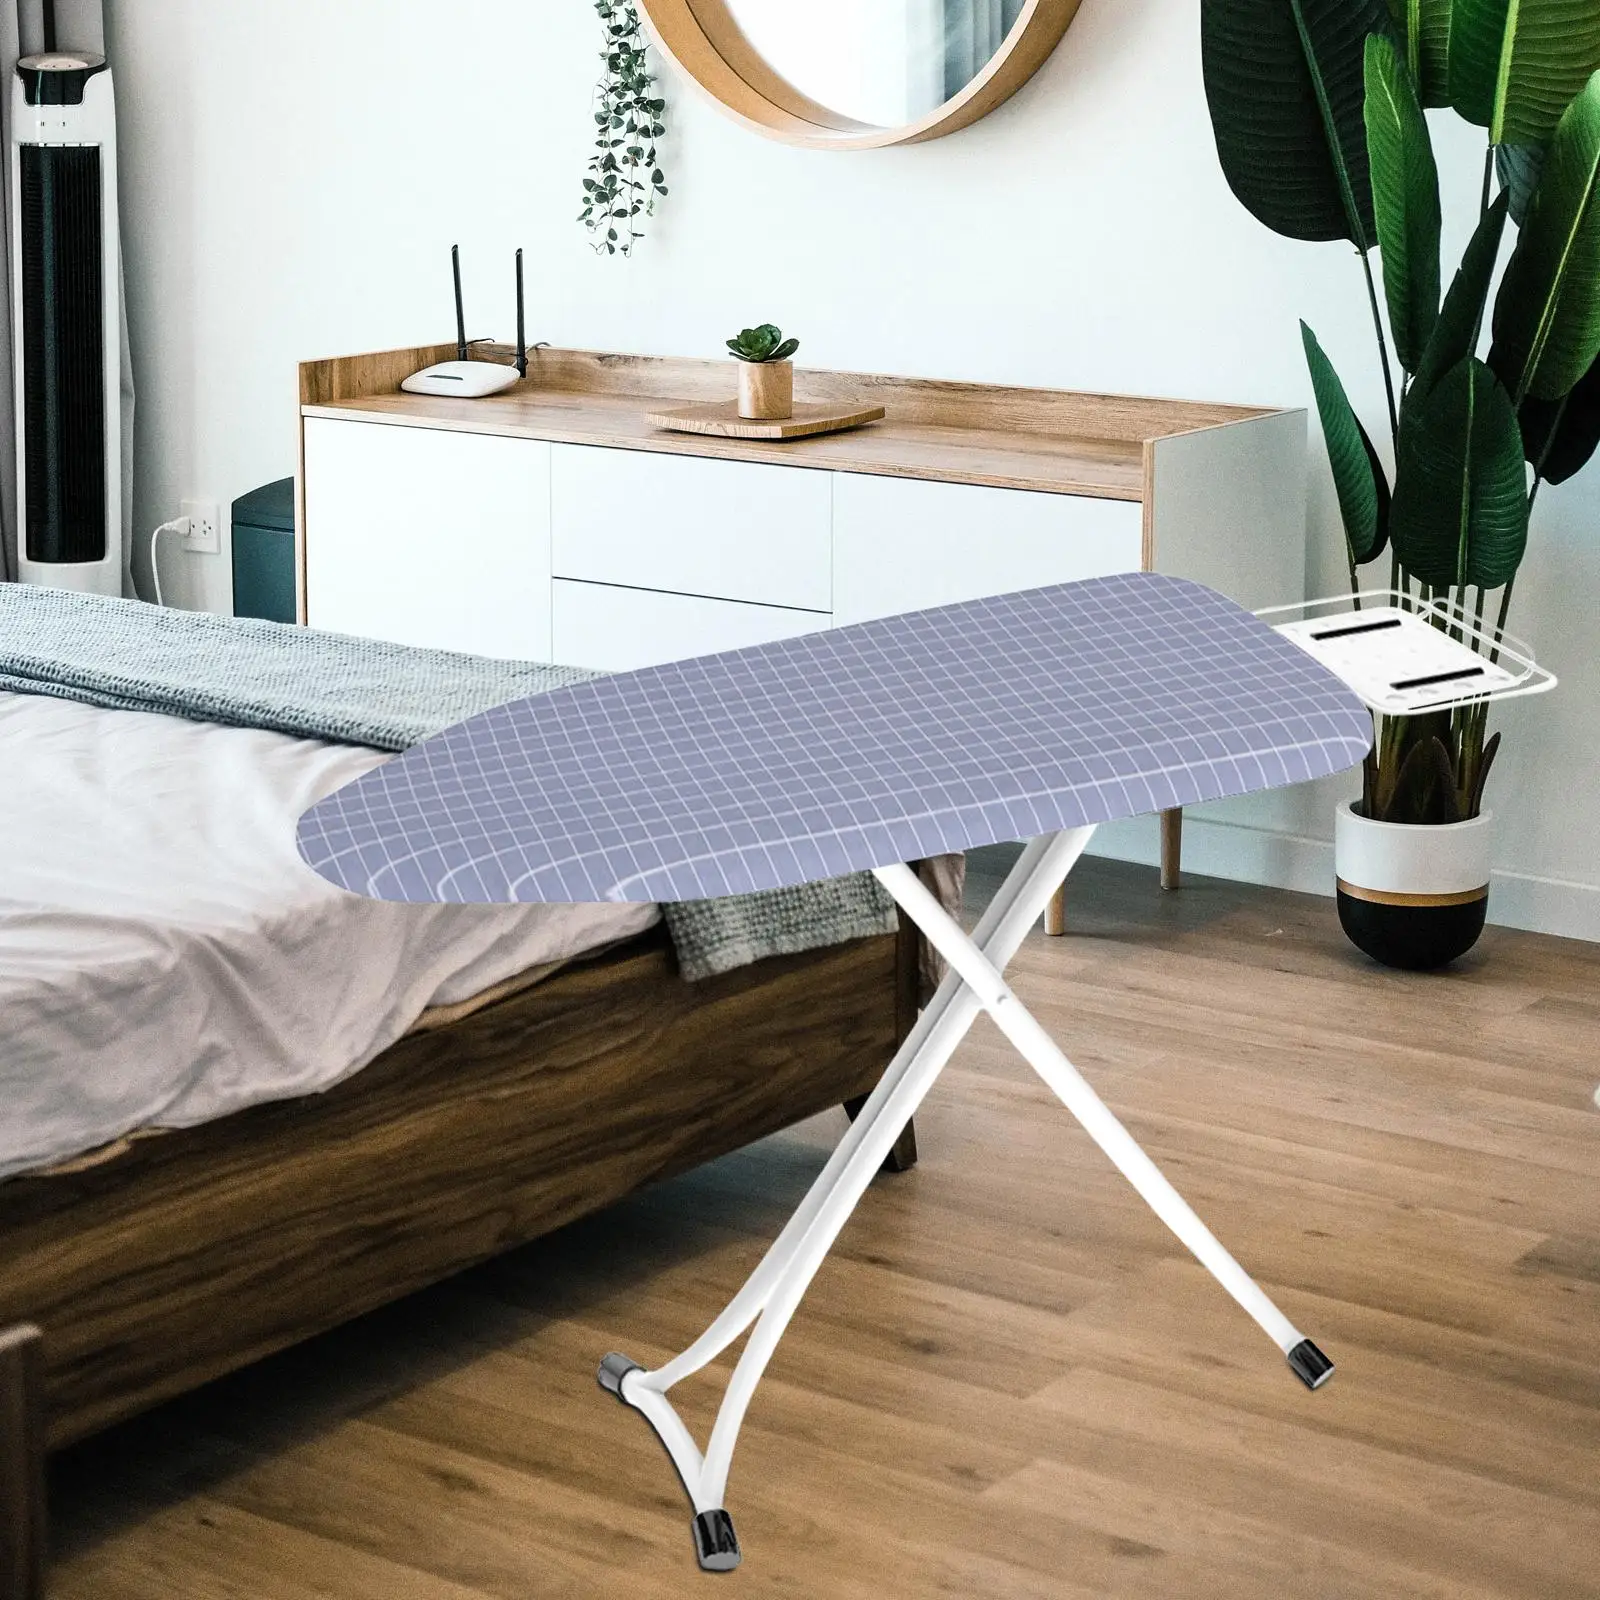 Heat Insulation Ironing Board Cover with Rope Buck Breathable Firm Soft Ironing Board Padded Cover for Replacement Household